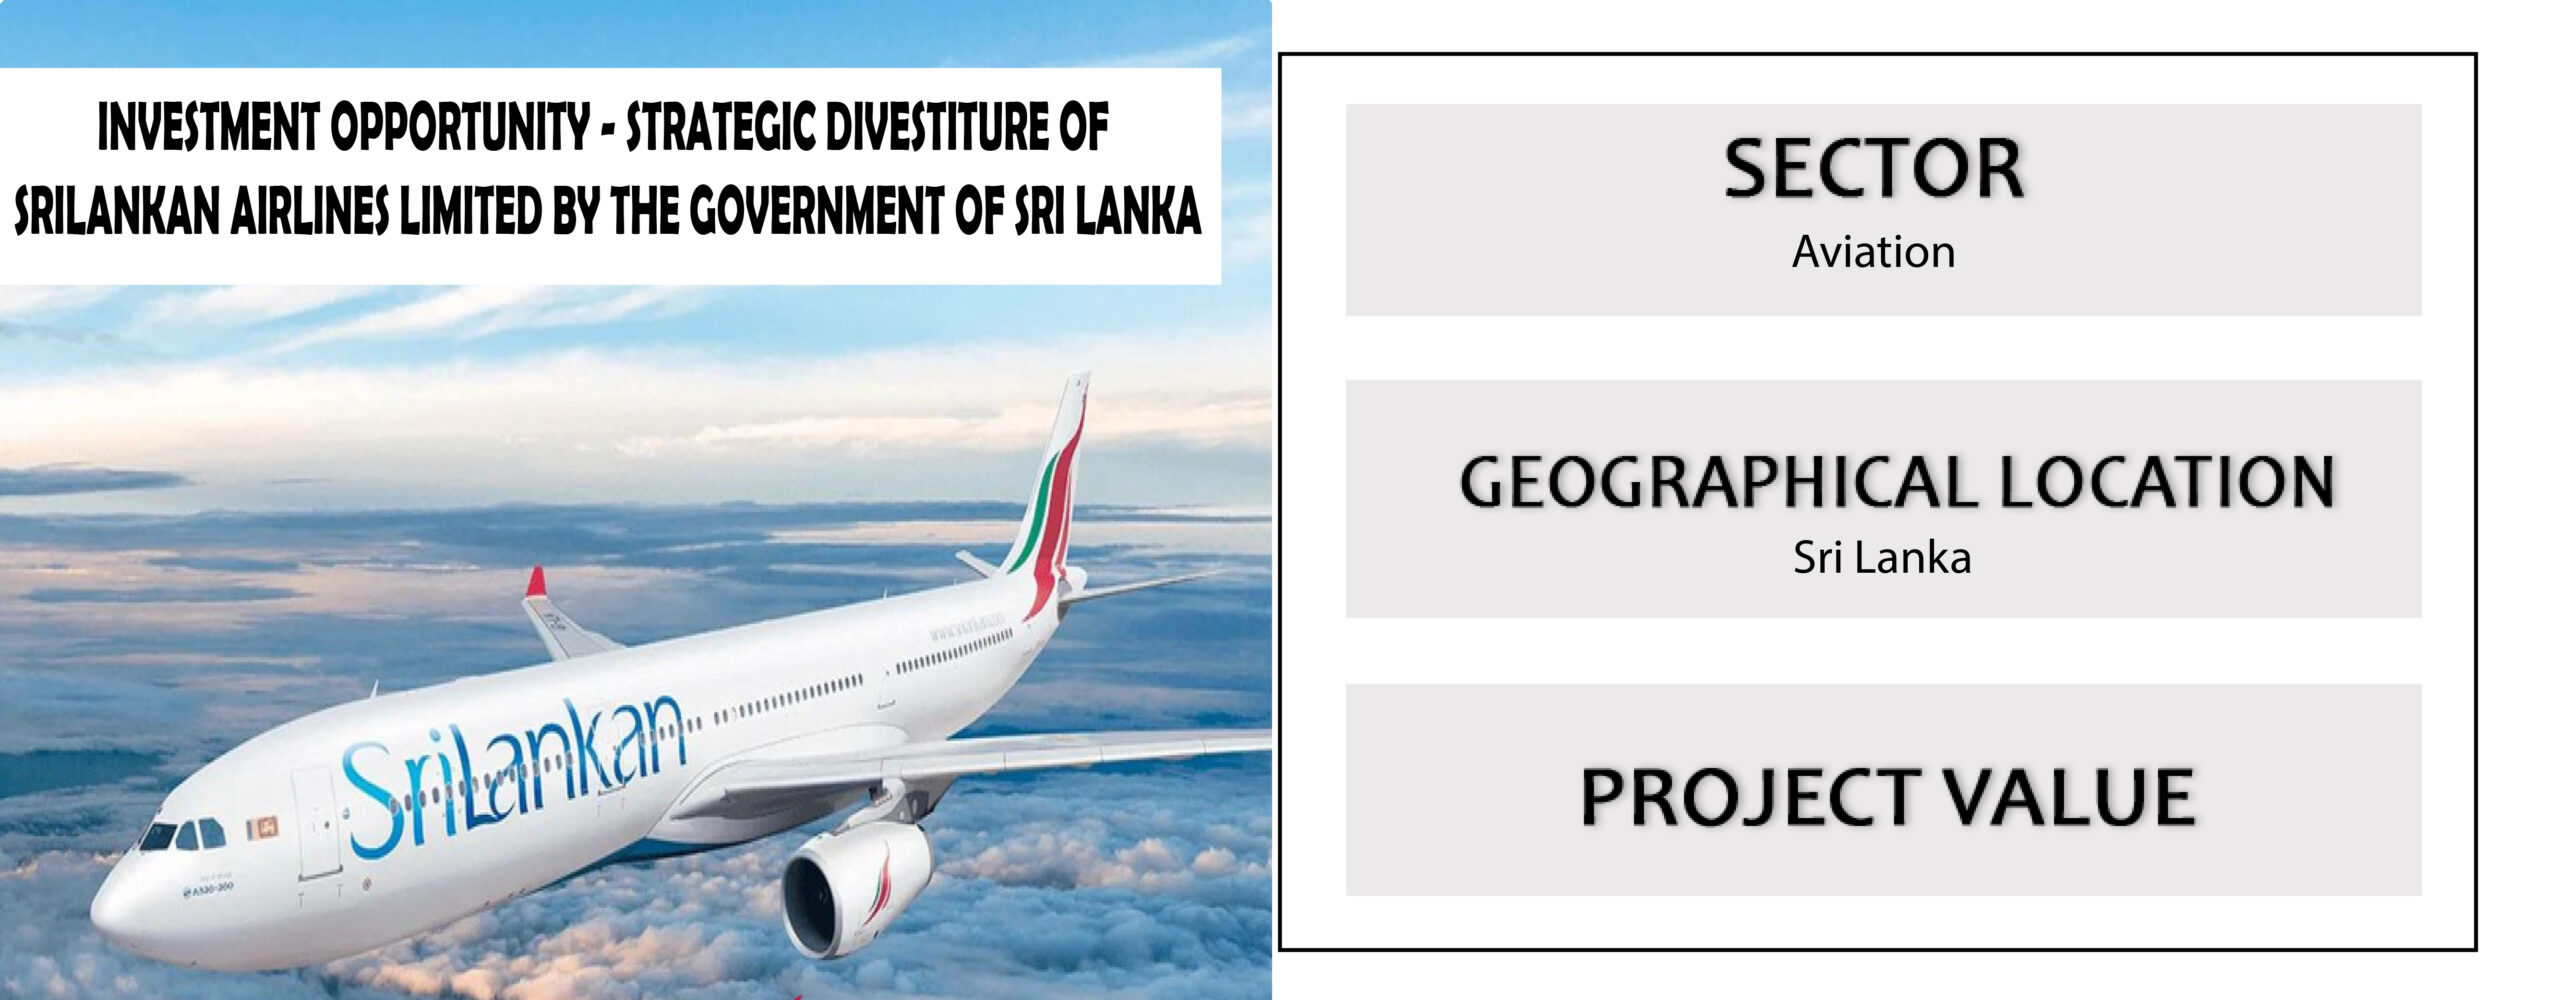 Strategic Divestiture Of Srilankan Airlines Limited By The Government Of Sri Lanka